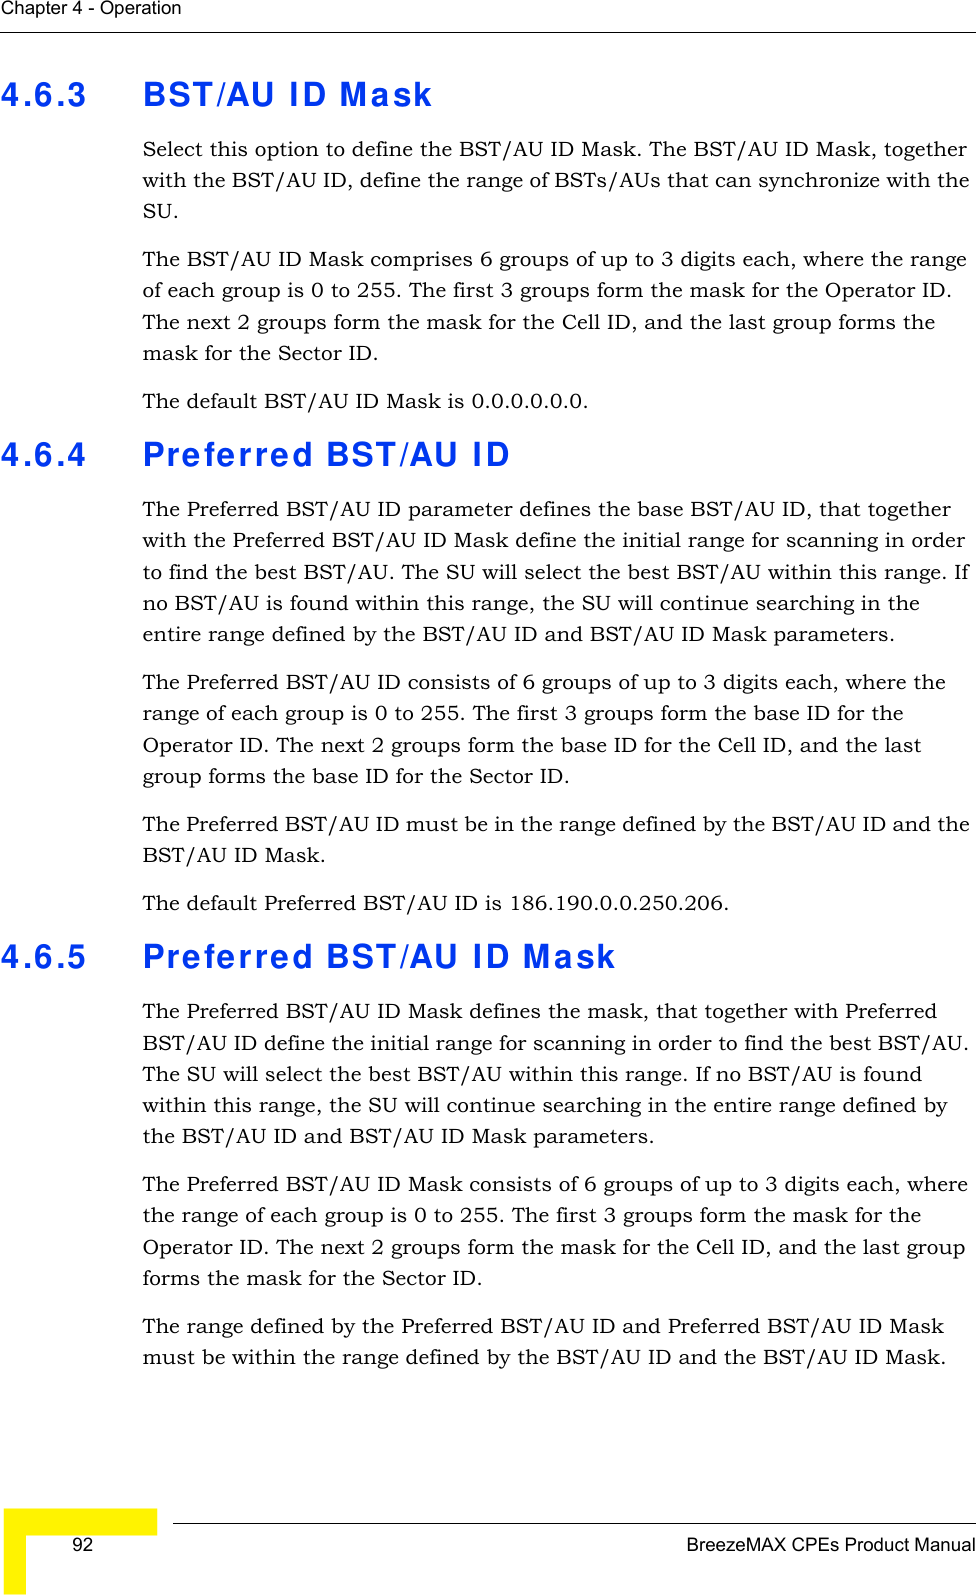  92 BreezeMAX CPEs Product ManualChapter 4 - Operation4.6.3 BST/AU ID MaskSelect this option to define the BST/AU ID Mask. The BST/AU ID Mask, together with the BST/AU ID, define the range of BSTs/AUs that can synchronize with the SU.The BST/AU ID Mask comprises 6 groups of up to 3 digits each, where the range of each group is 0 to 255. The first 3 groups form the mask for the Operator ID. The next 2 groups form the mask for the Cell ID, and the last group forms the mask for the Sector ID.The default BST/AU ID Mask is 0.0.0.0.0.0.4.6.4 Preferred BST/AU IDThe Preferred BST/AU ID parameter defines the base BST/AU ID, that together with the Preferred BST/AU ID Mask define the initial range for scanning in order to find the best BST/AU. The SU will select the best BST/AU within this range. If no BST/AU is found within this range, the SU will continue searching in the entire range defined by the BST/AU ID and BST/AU ID Mask parameters.The Preferred BST/AU ID consists of 6 groups of up to 3 digits each, where the range of each group is 0 to 255. The first 3 groups form the base ID for the Operator ID. The next 2 groups form the base ID for the Cell ID, and the last group forms the base ID for the Sector ID.The Preferred BST/AU ID must be in the range defined by the BST/AU ID and the BST/AU ID Mask.The default Preferred BST/AU ID is 186.190.0.0.250.206.4.6.5 Preferred BST/AU ID MaskThe Preferred BST/AU ID Mask defines the mask, that together with Preferred BST/AU ID define the initial range for scanning in order to find the best BST/AU. The SU will select the best BST/AU within this range. If no BST/AU is found within this range, the SU will continue searching in the entire range defined by the BST/AU ID and BST/AU ID Mask parameters.The Preferred BST/AU ID Mask consists of 6 groups of up to 3 digits each, where the range of each group is 0 to 255. The first 3 groups form the mask for the Operator ID. The next 2 groups form the mask for the Cell ID, and the last group forms the mask for the Sector ID.The range defined by the Preferred BST/AU ID and Preferred BST/AU ID Mask must be within the range defined by the BST/AU ID and the BST/AU ID Mask.